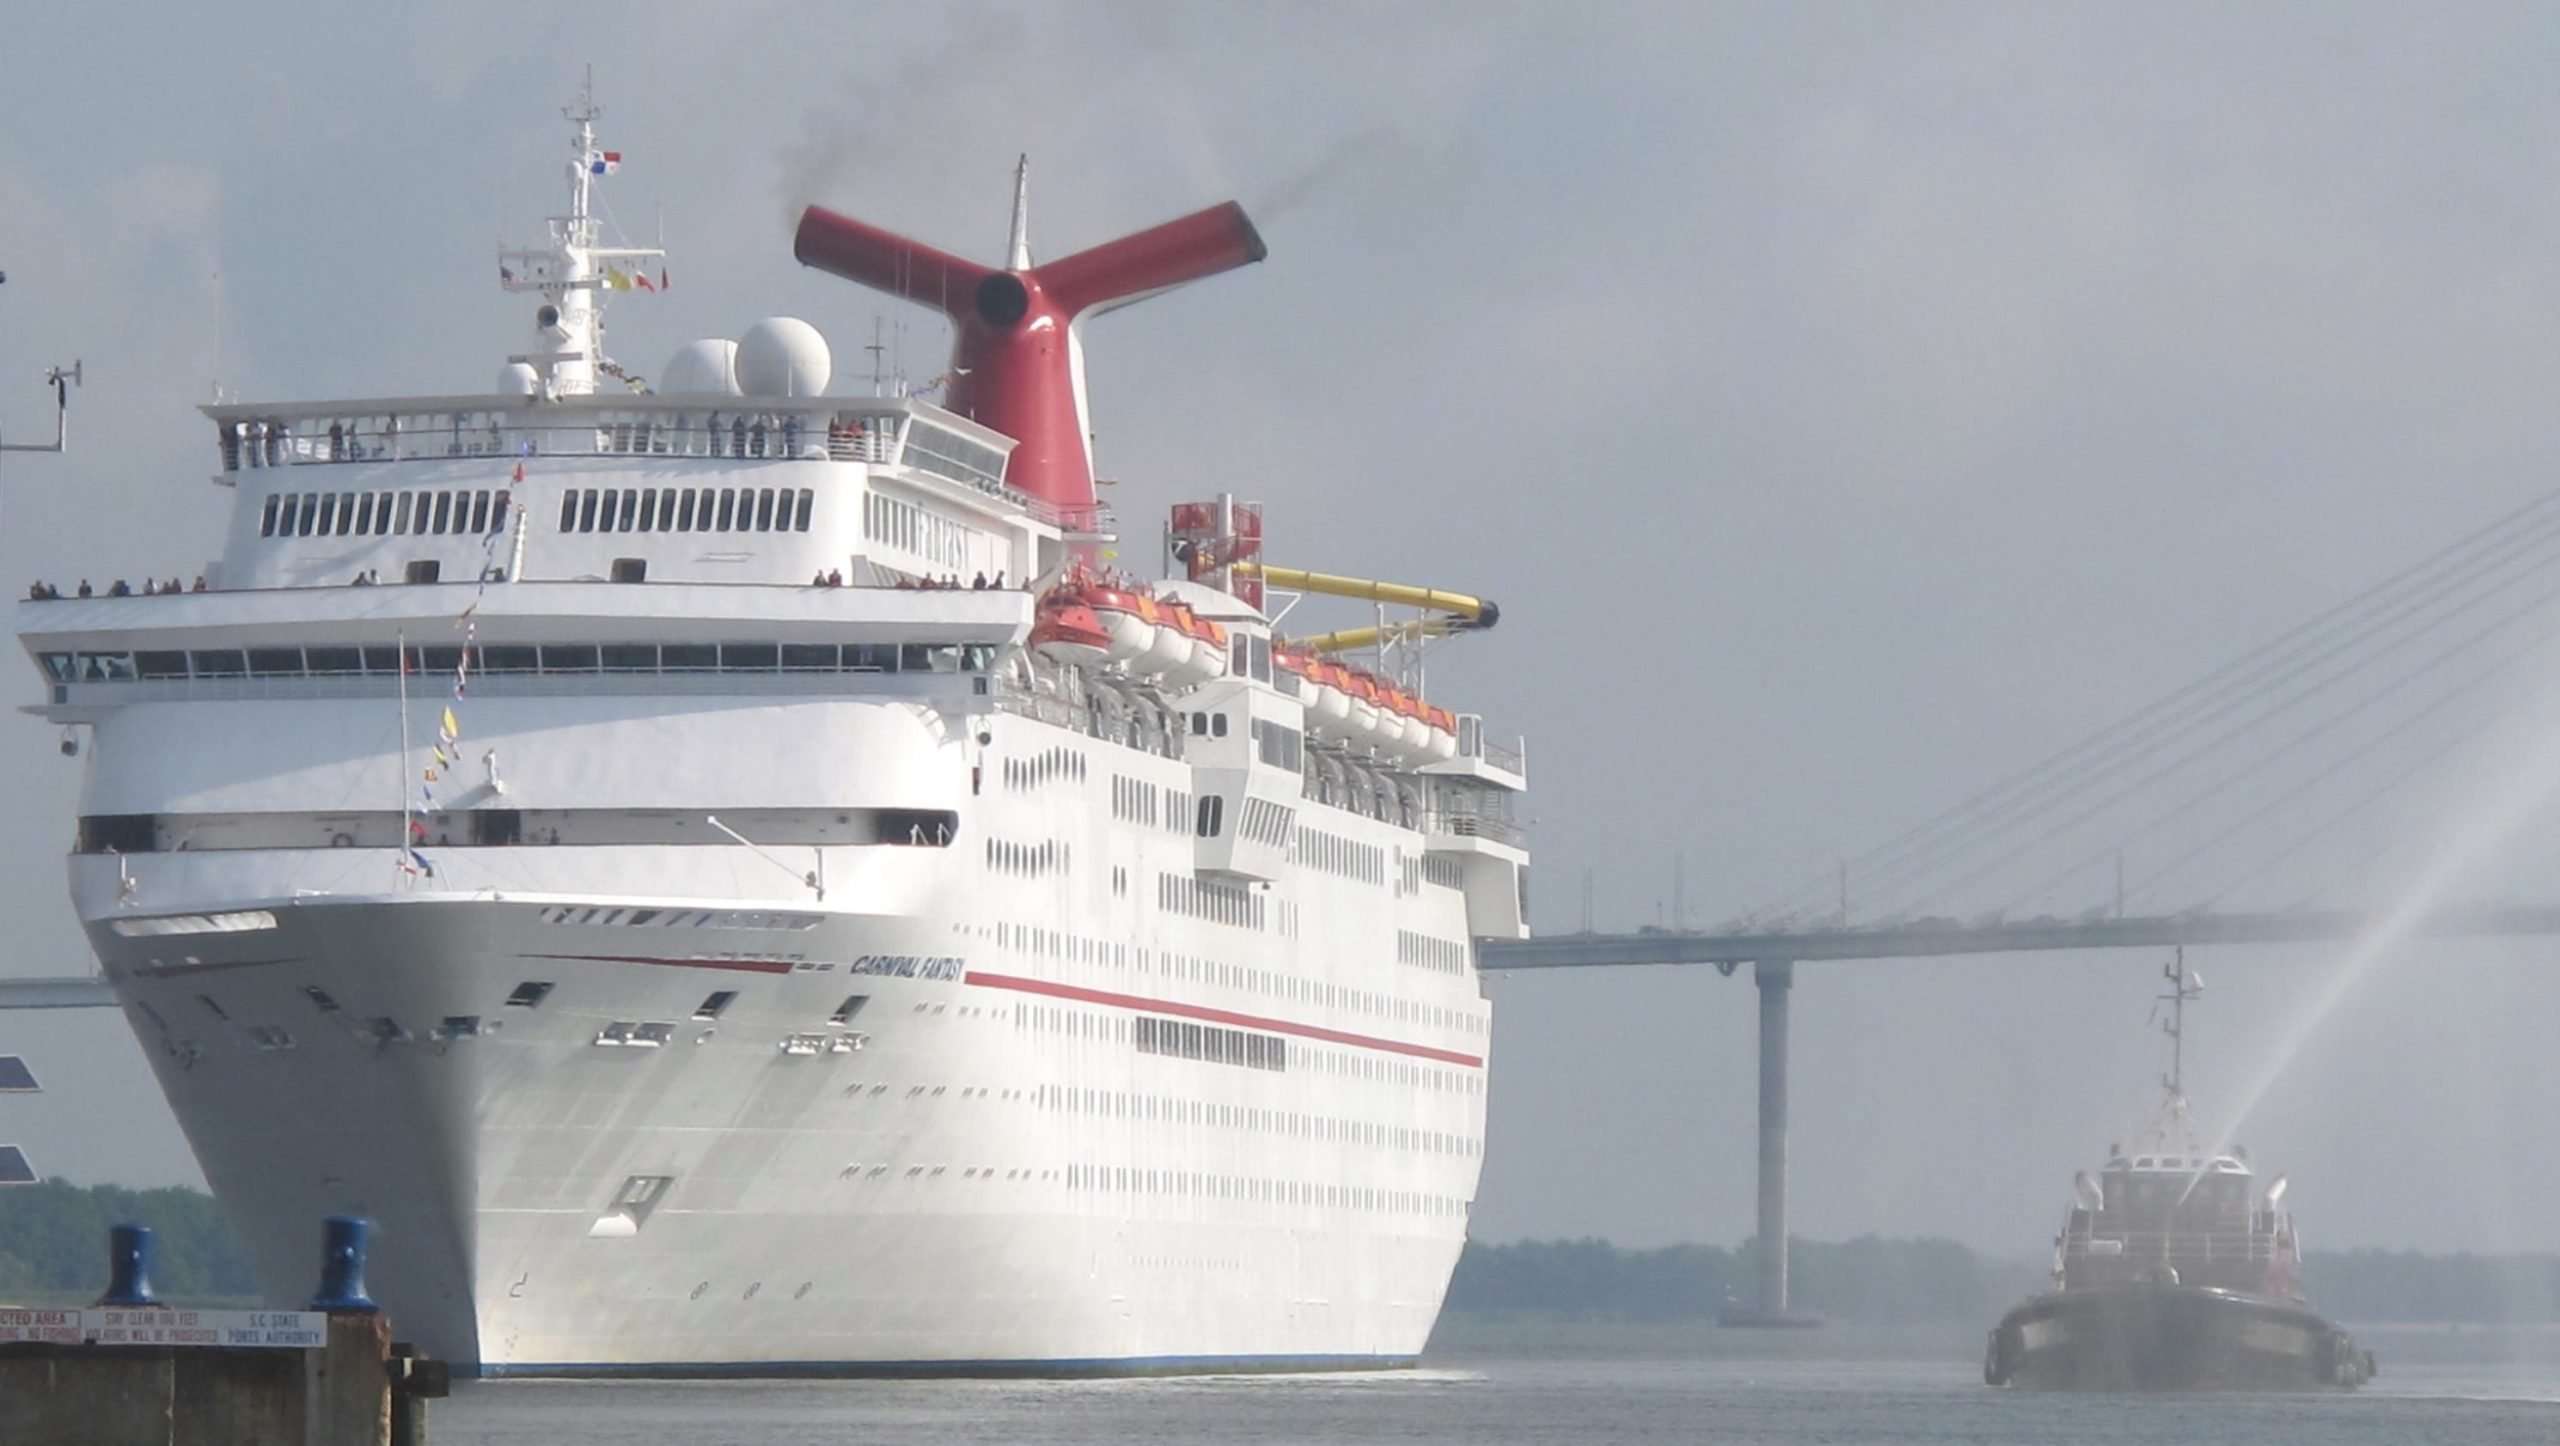 Sweet home, Carnival: Mobile, Ala. is back as a cruise port